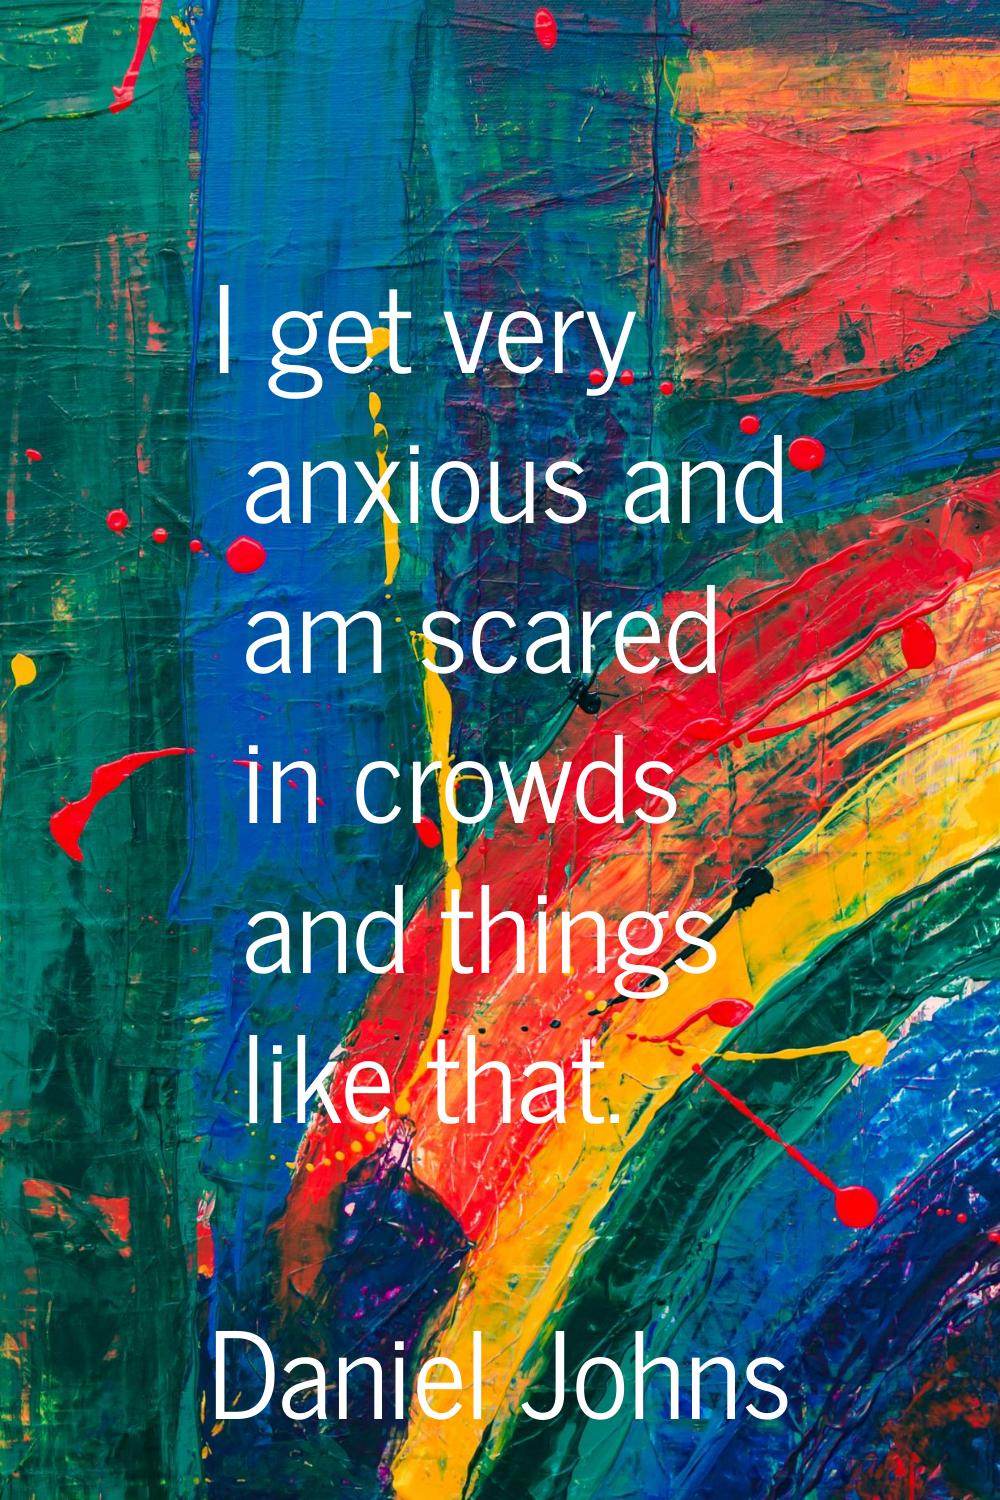 I get very anxious and am scared in crowds and things like that.